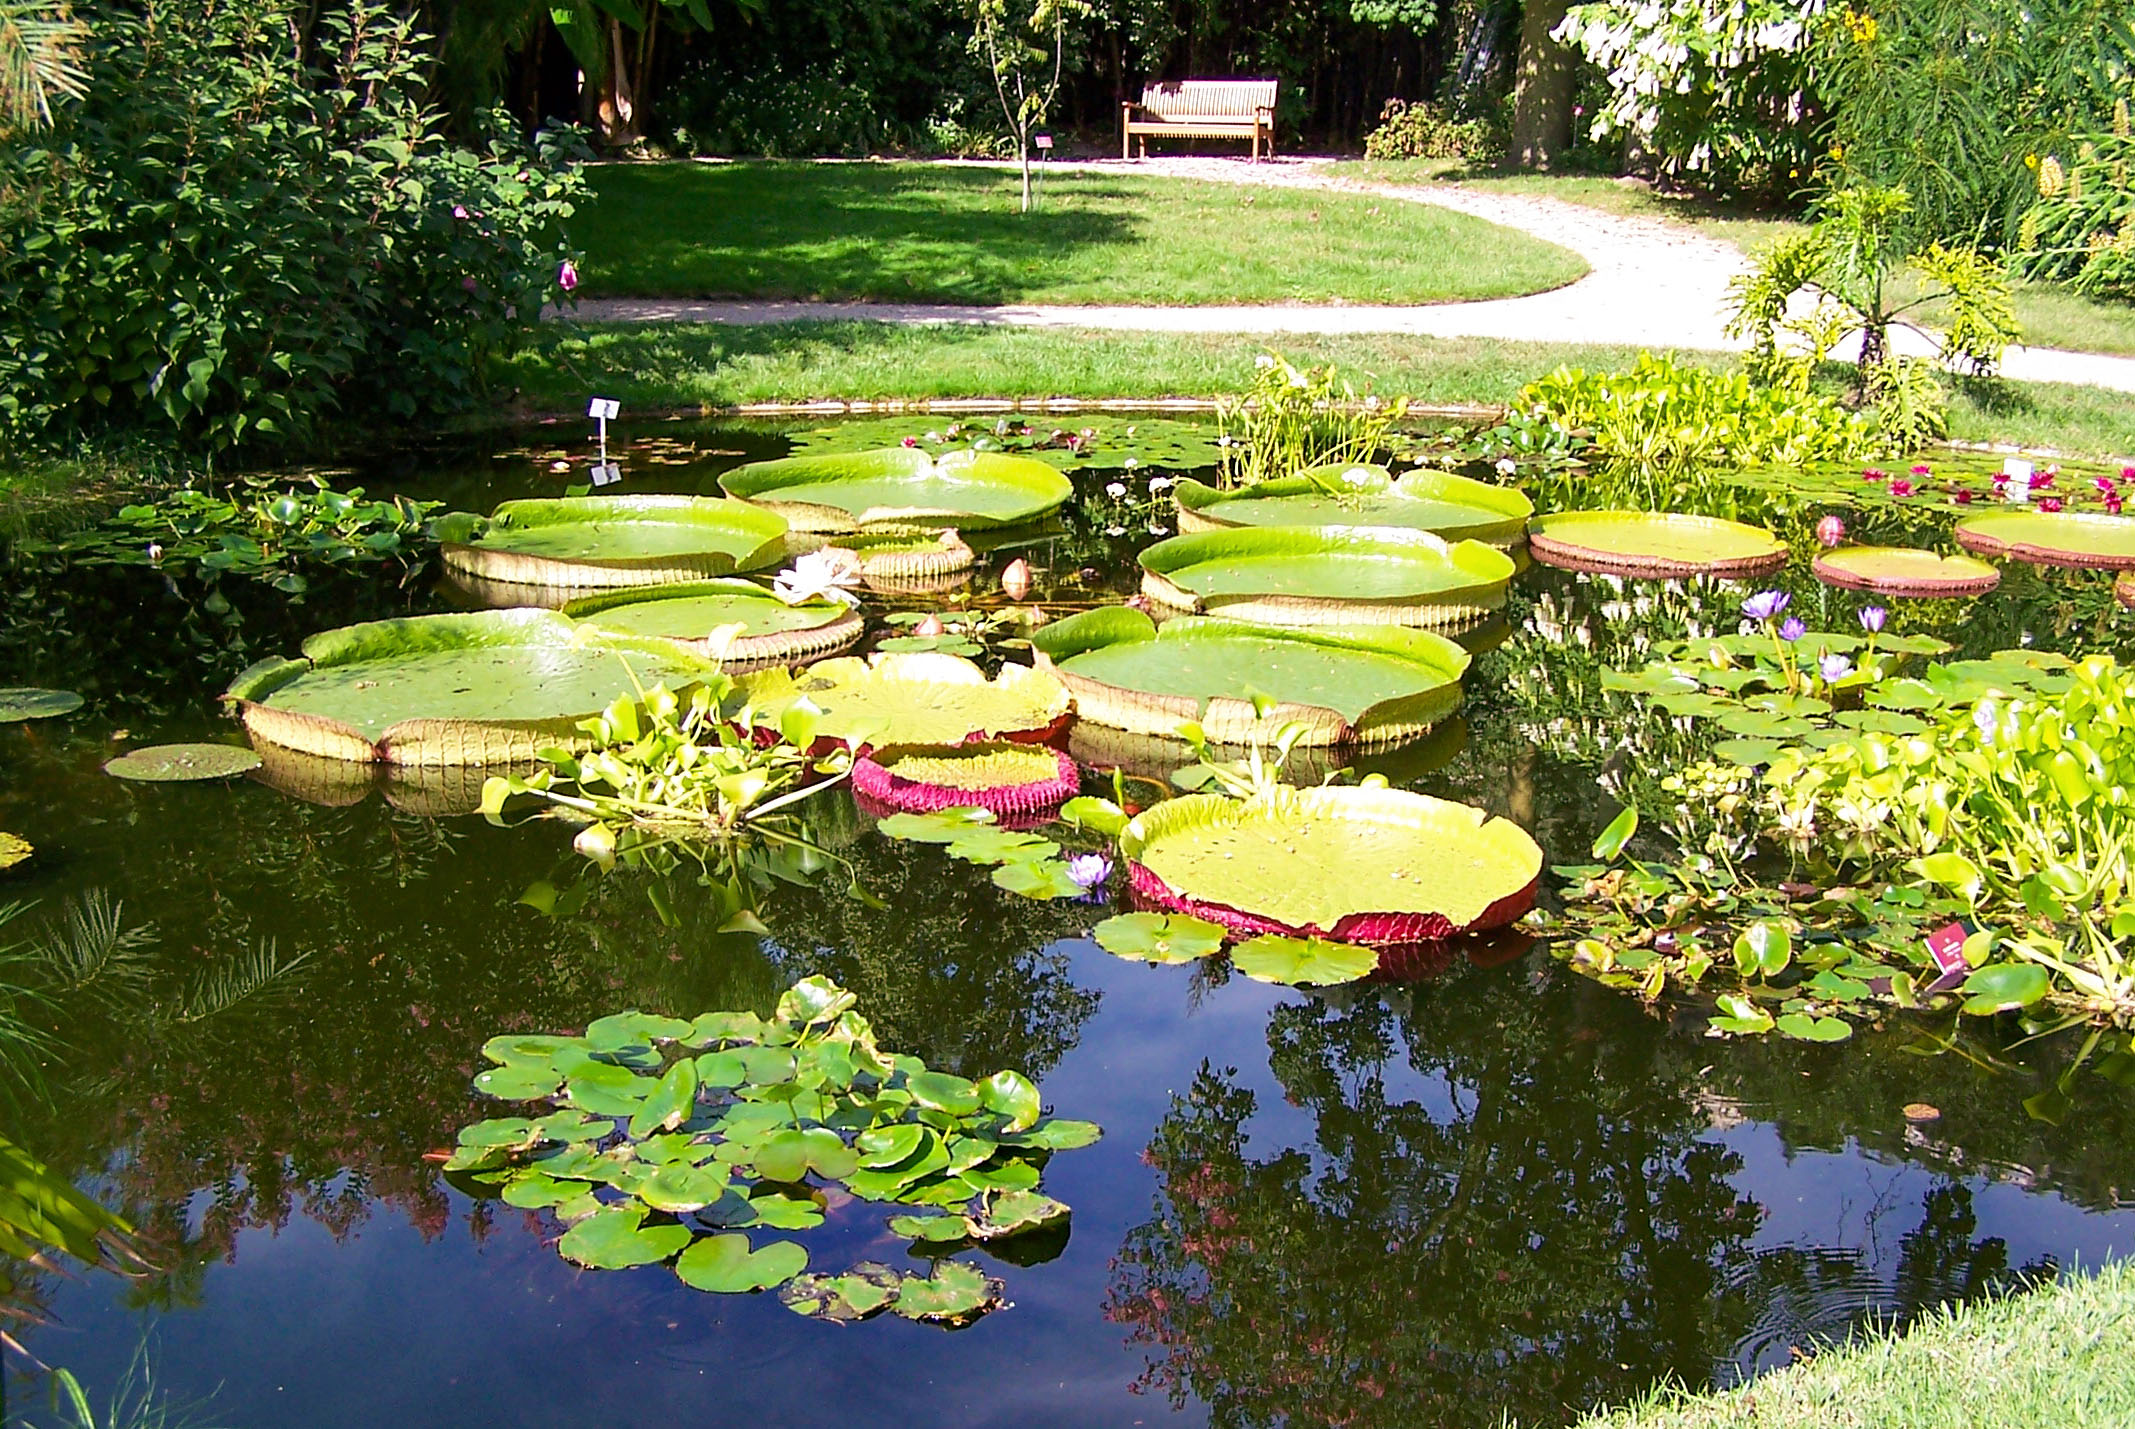 The Victoria amazonica pond, Val Rameh © Berthold Werner - licence [CC BY-SA 3.0] from Wikimedia Commons